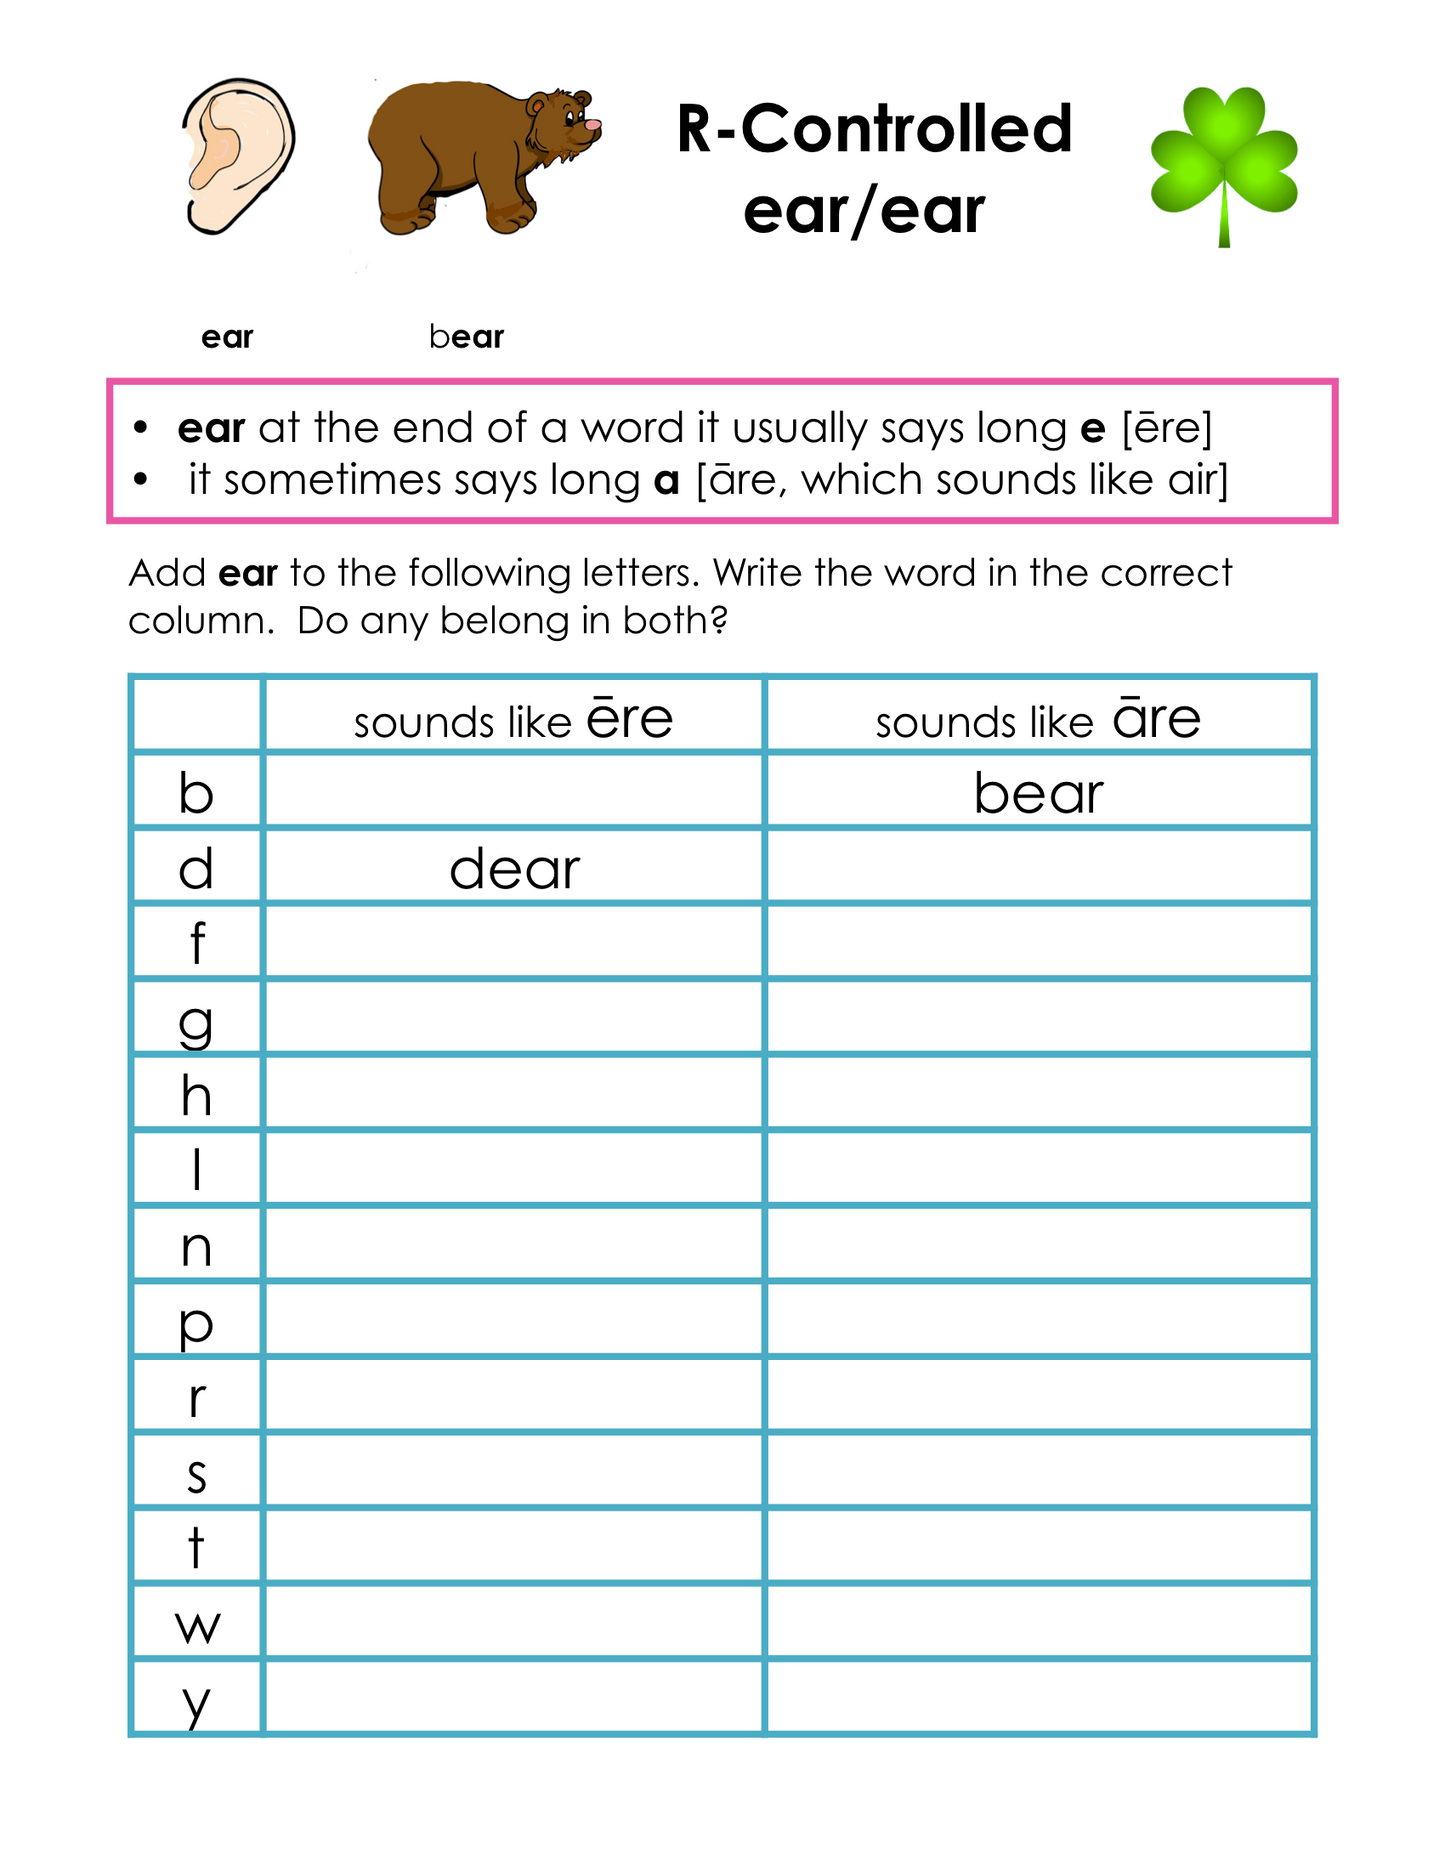 6 Types of Syllables gr. K-8